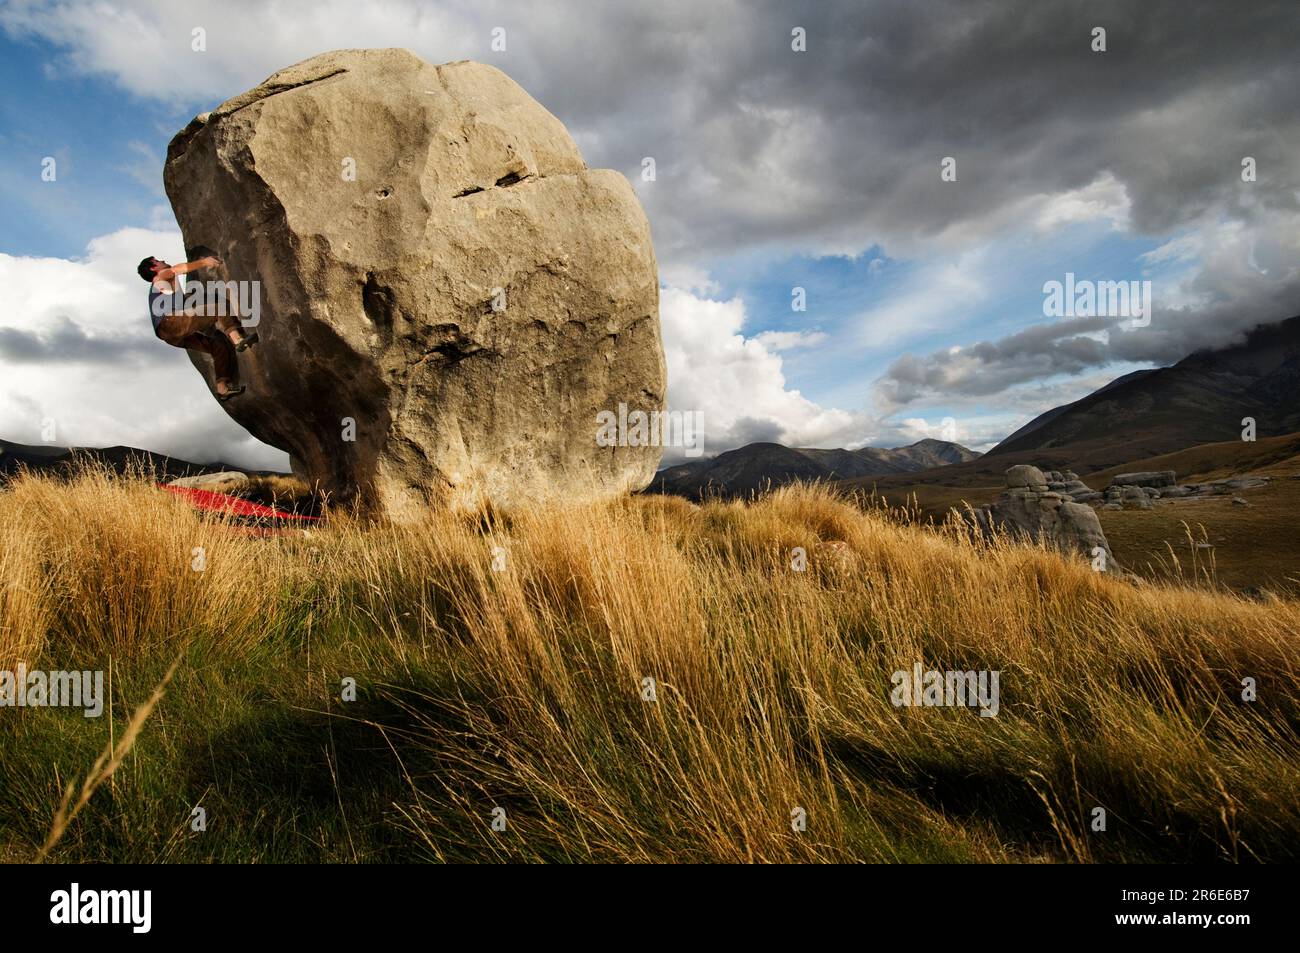 Young man climbing a boulder surrounded by tall grass and mountains in the Castle Hill Basin, New Zealand. Stock Photo